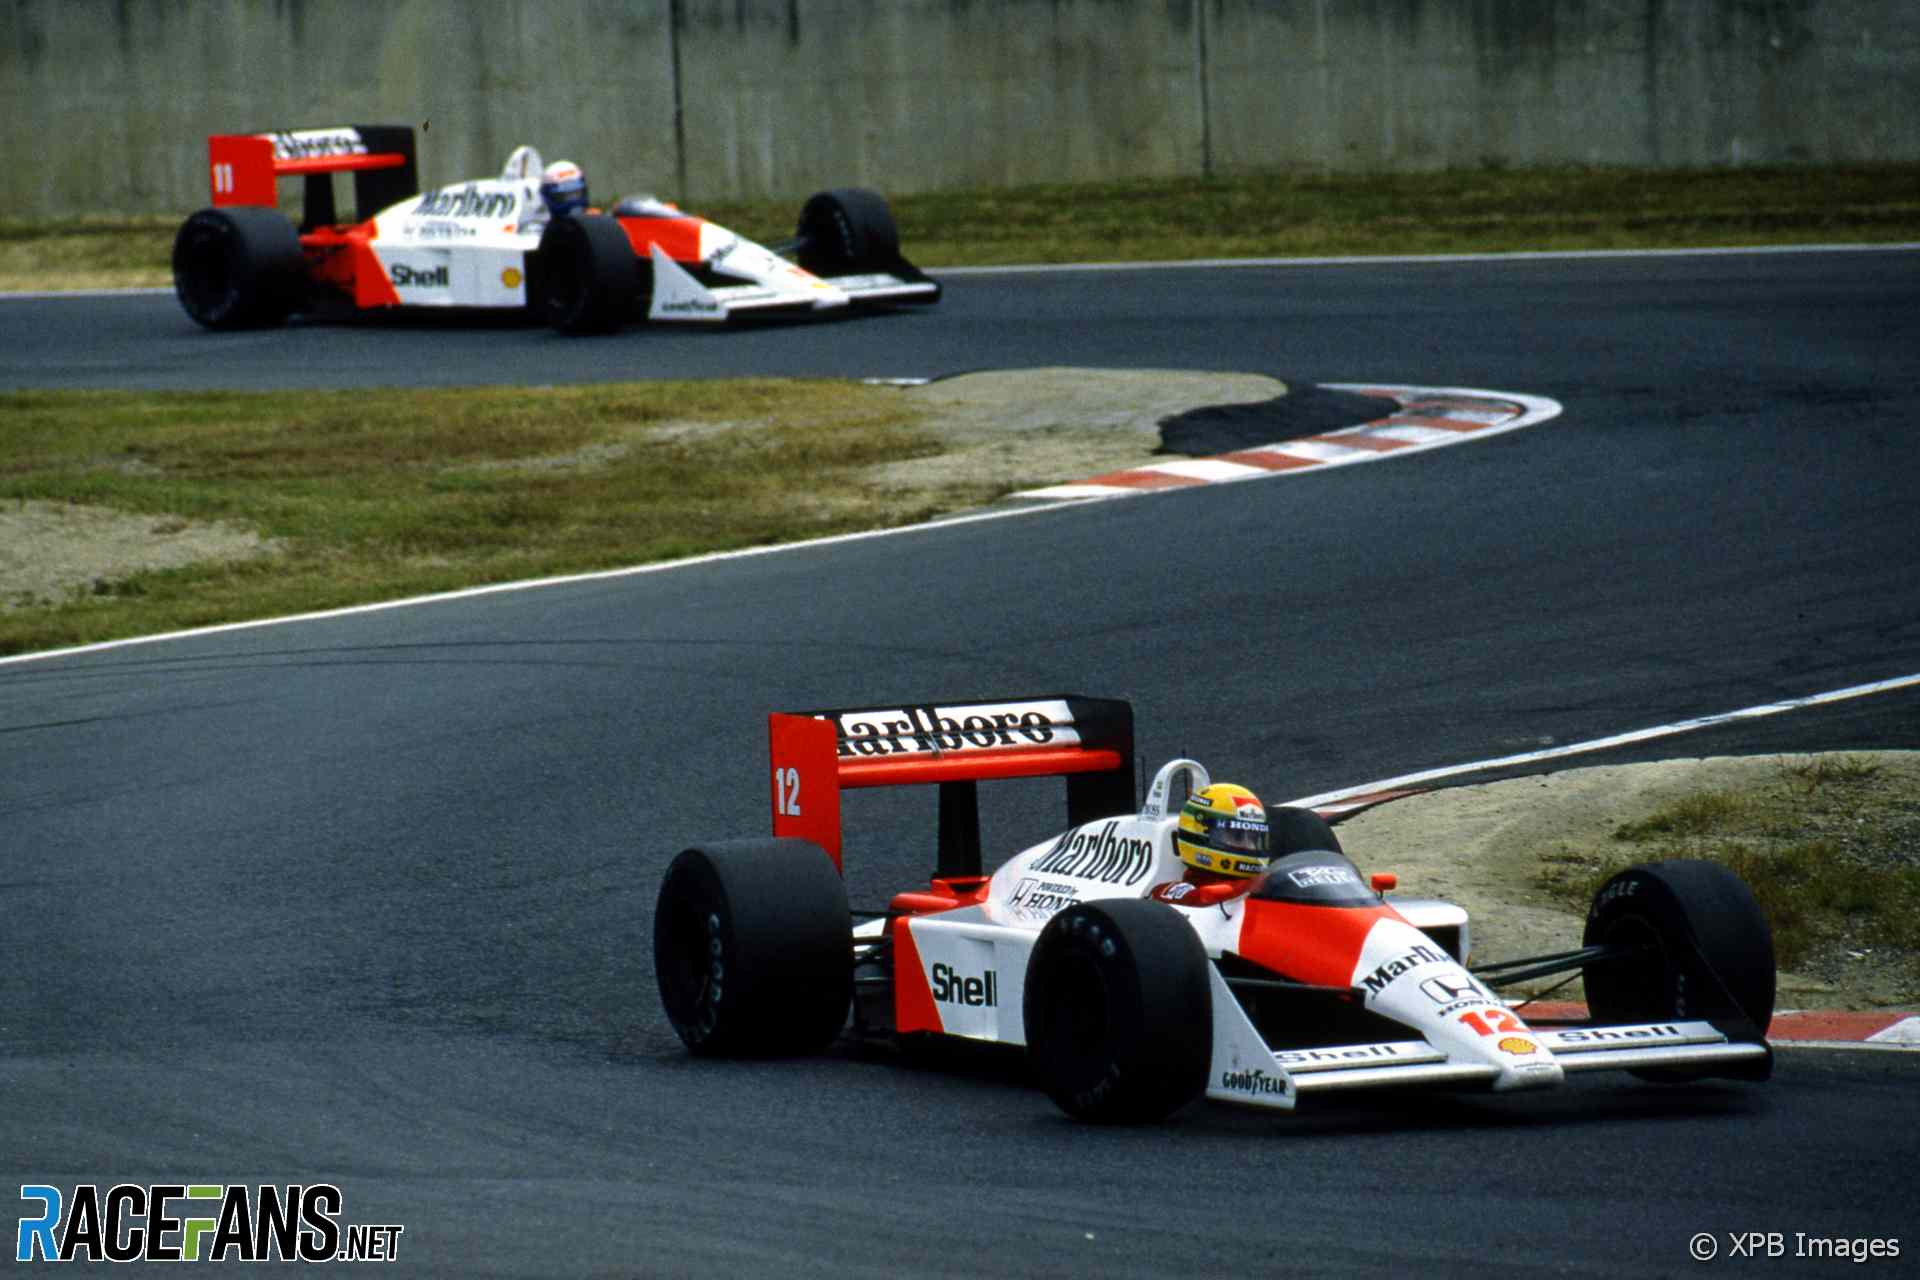 Alain Prost scored the most points but lost the title to Ayrton Senna in 1988